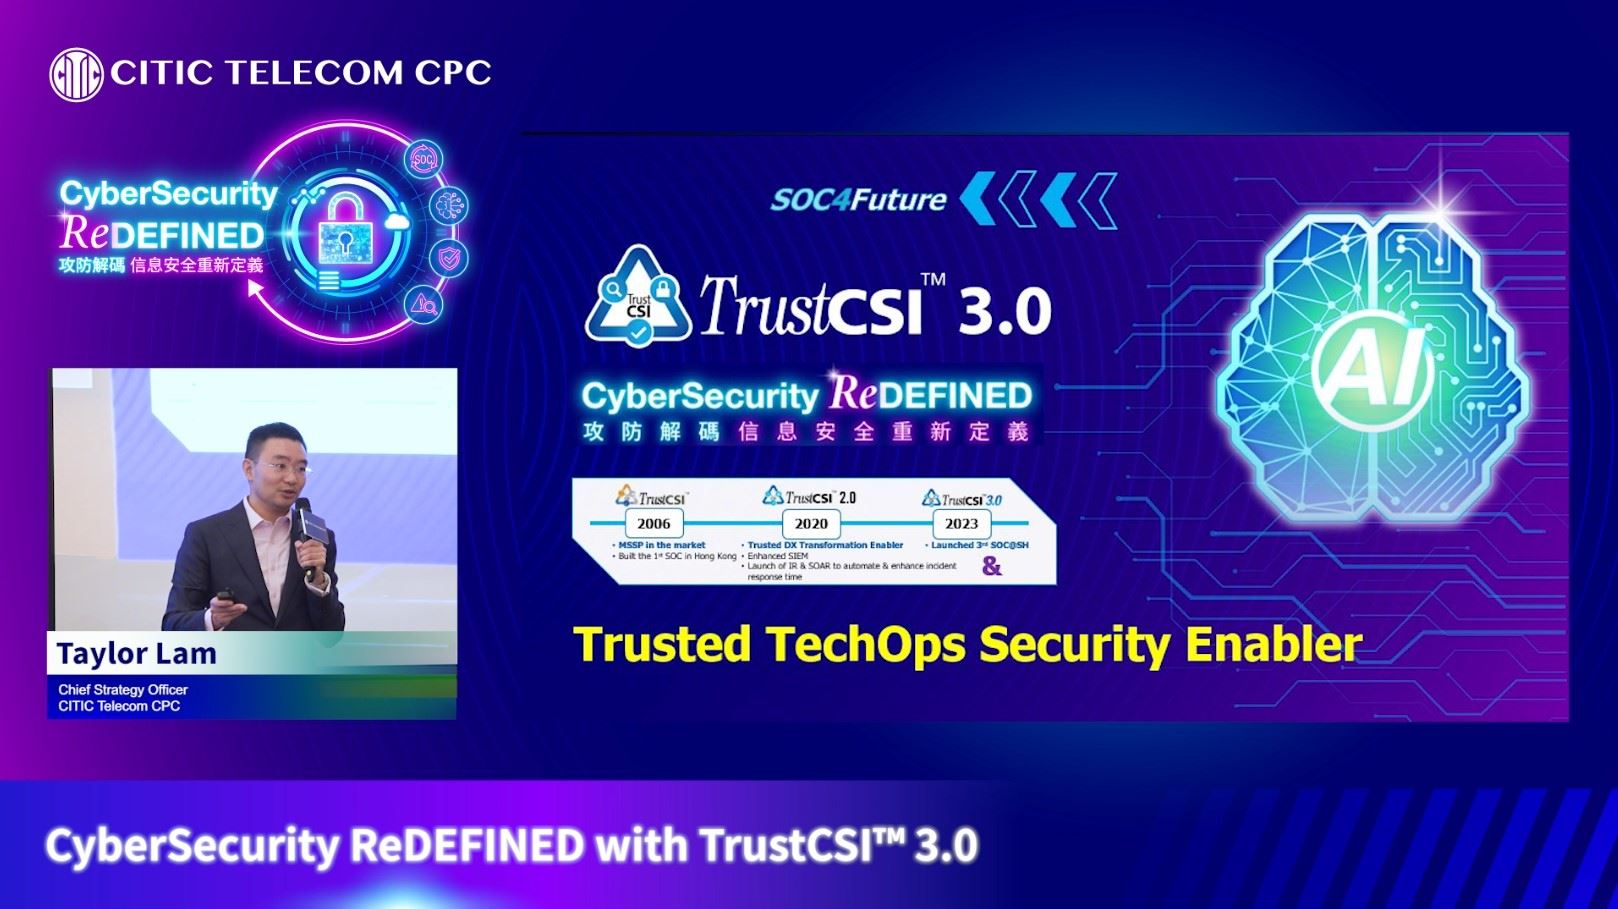 【CyberSecurity ReDEFINED Conference】TrustCSI™ 3.0 and SOC4Future